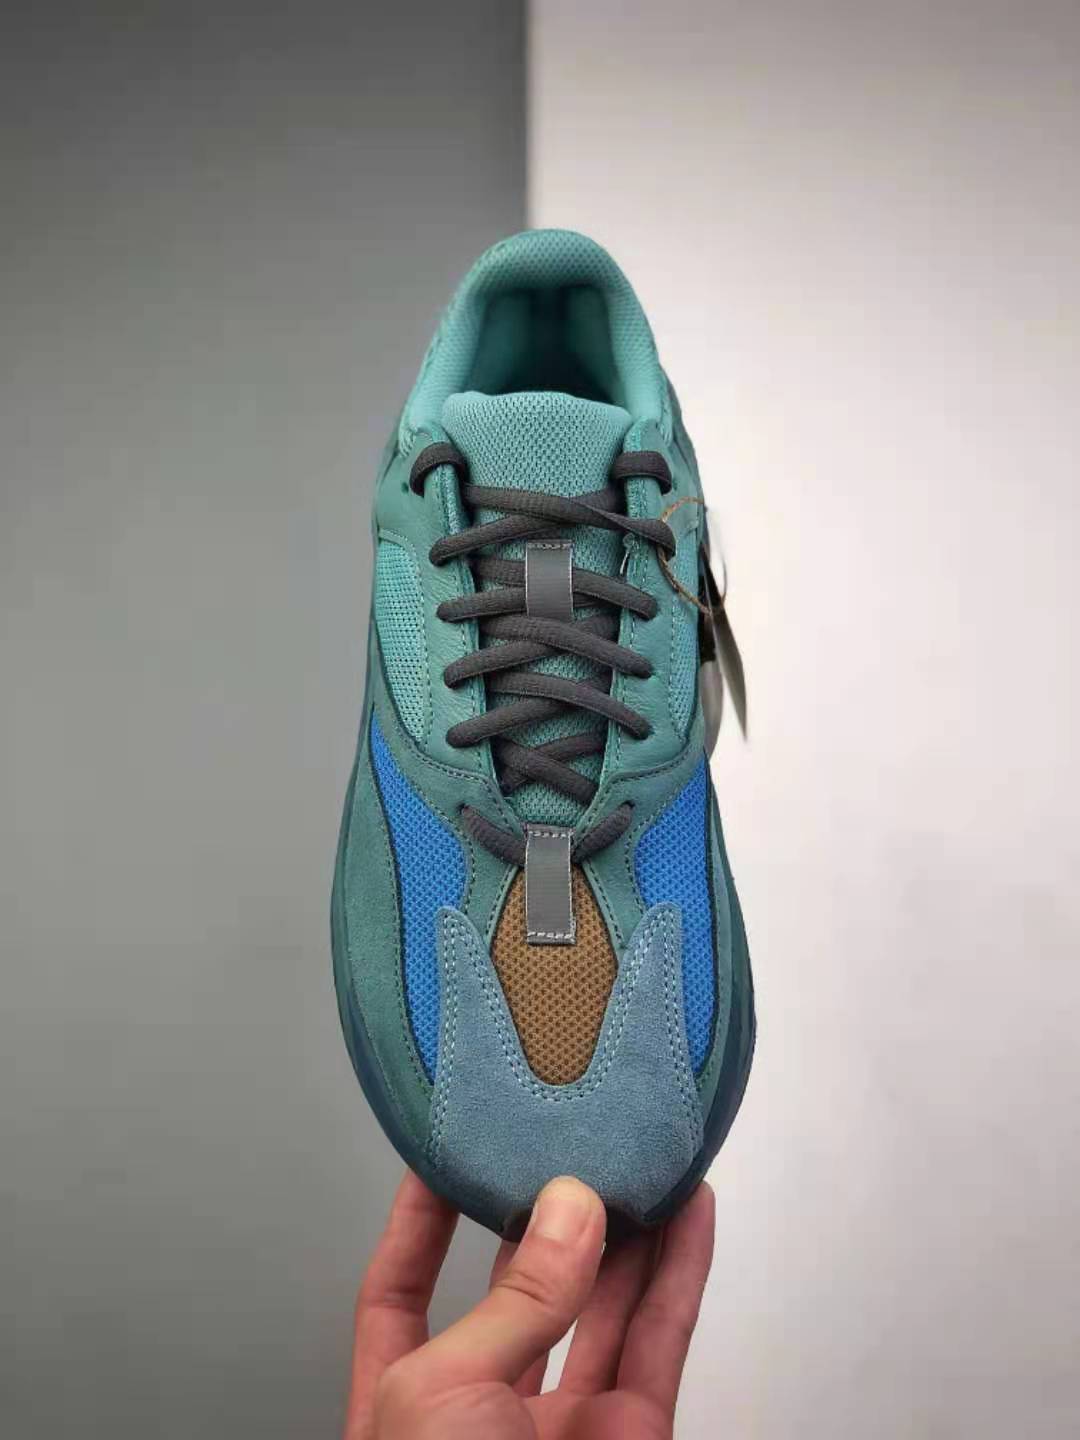 Adidas Yeezy Boost 700 Faded Azure GZ2002: Stylish and Comfortable Sneakers